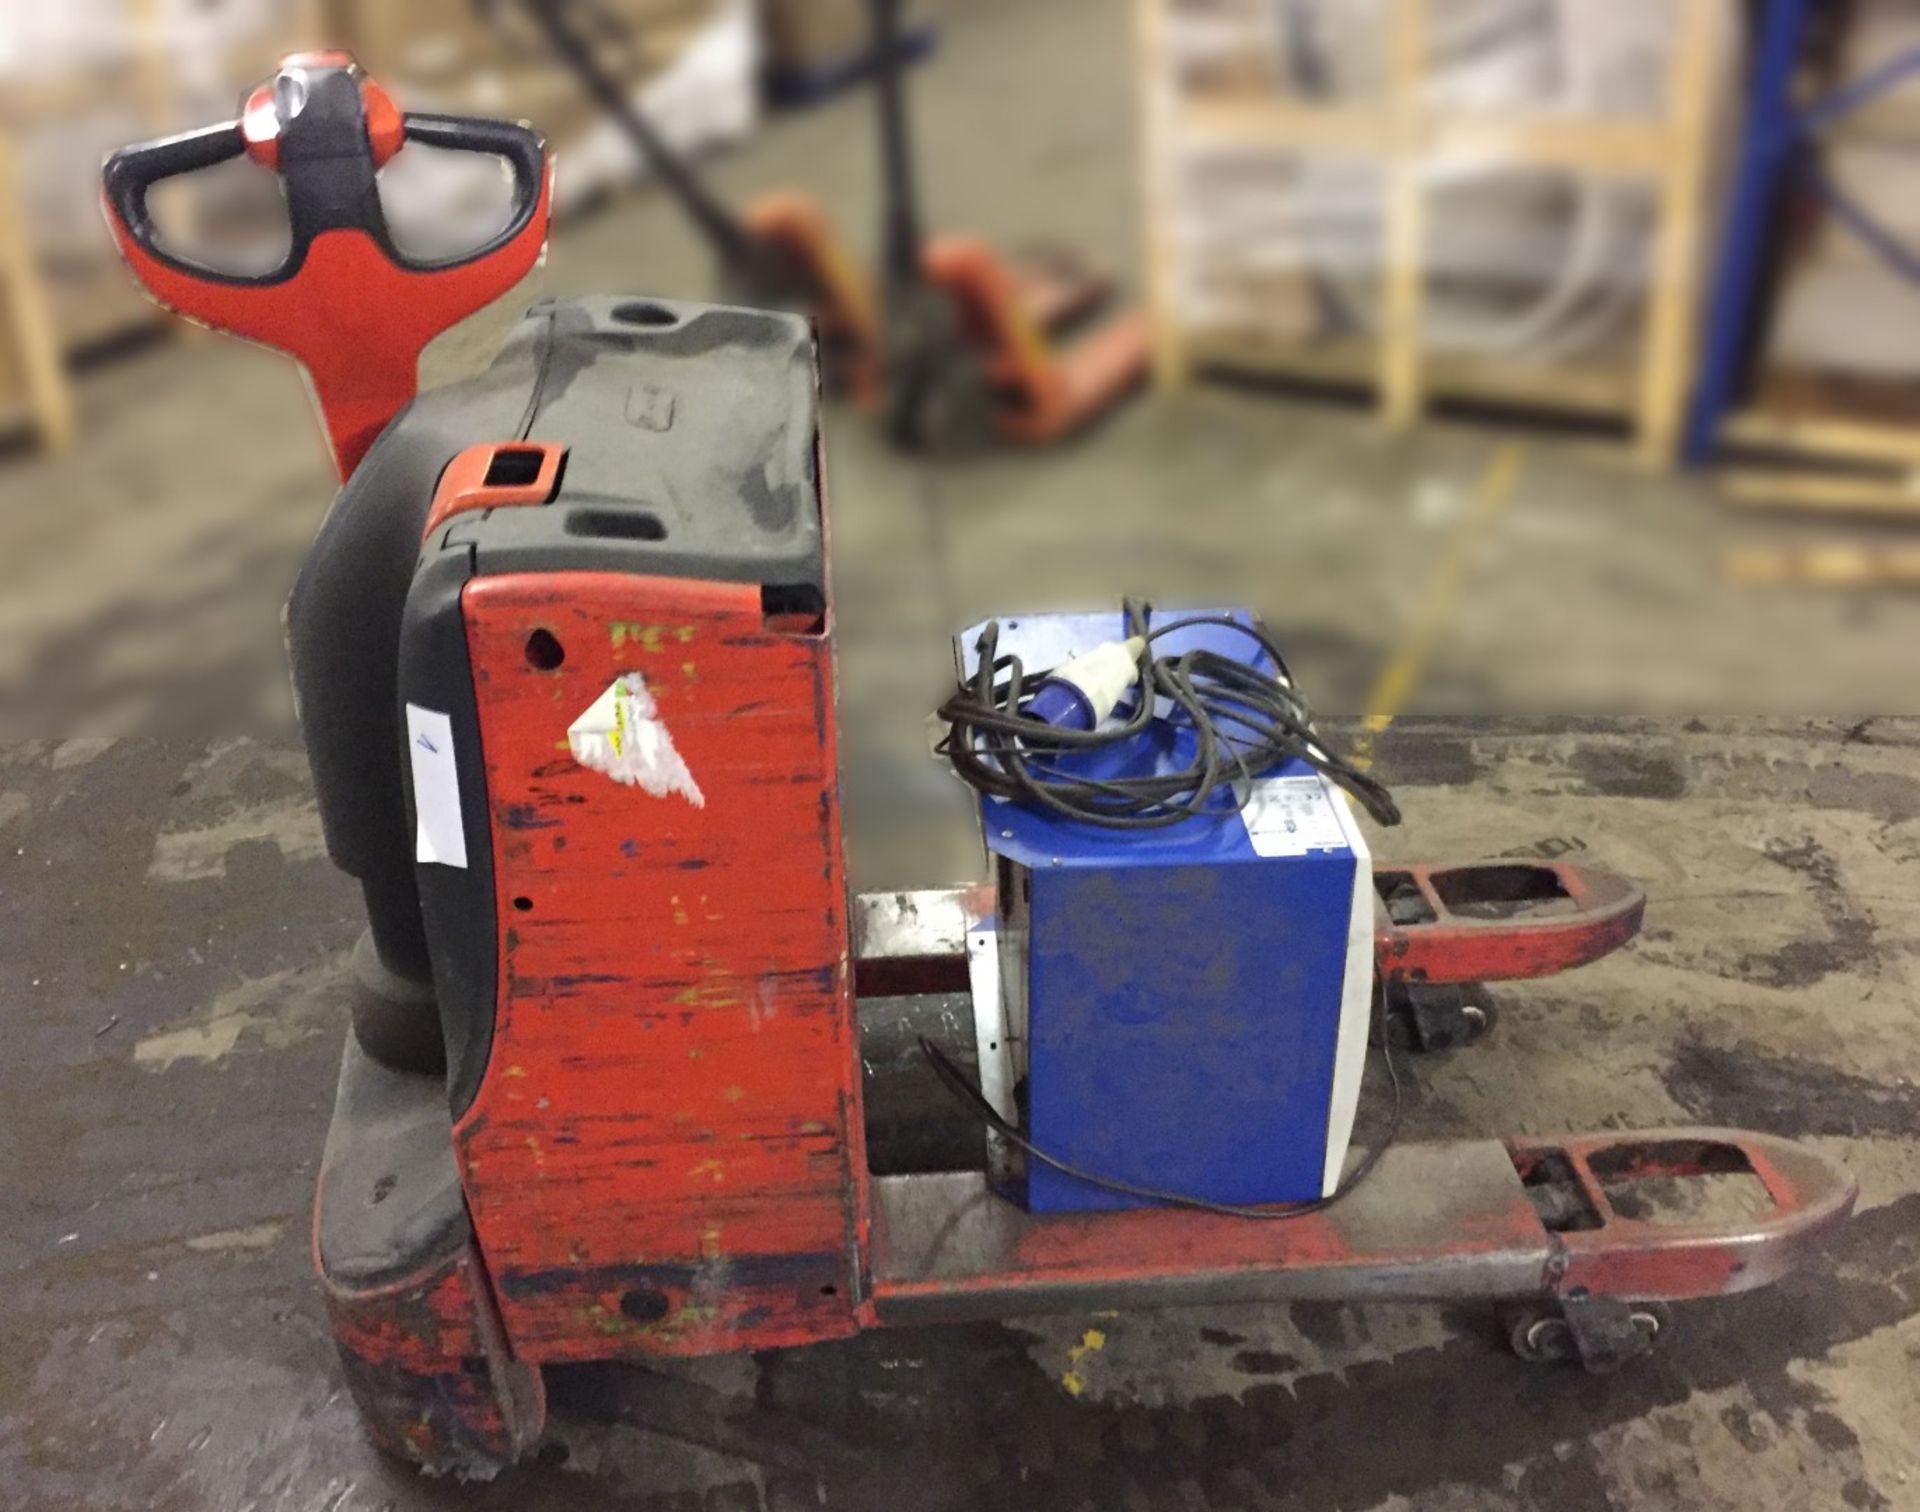 1 x Linde T20 Electric Pallet Truck - Tested and Working - Charger Included - CL007 - Ref: T20/1 - - Image 2 of 12